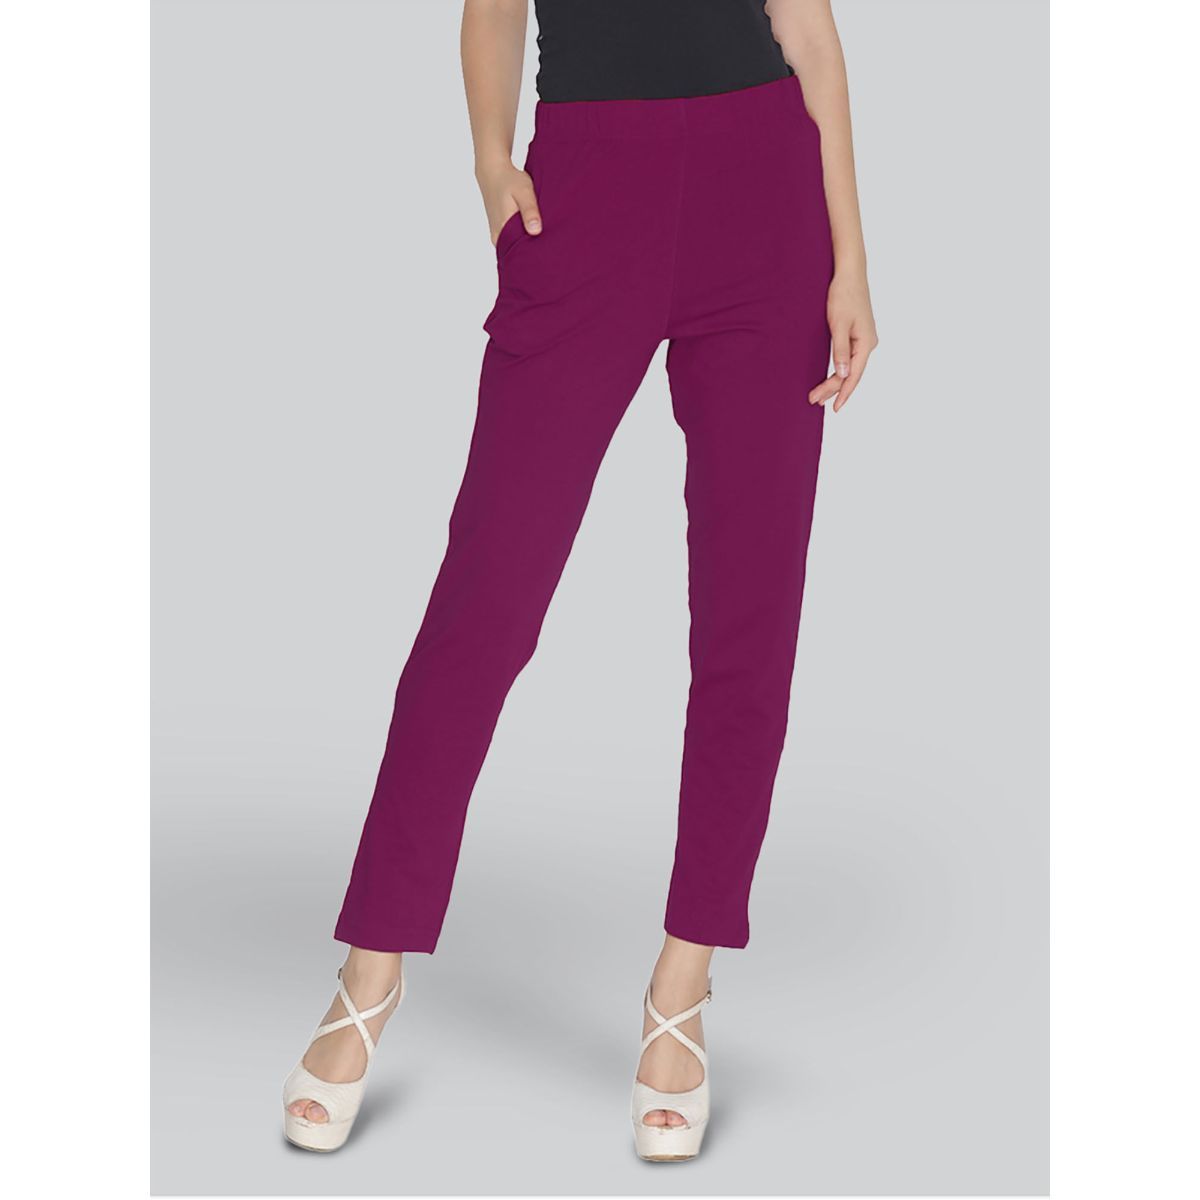 Marie Claire Bottoms Pants and Trousers  Buy Marie Claire Women Casual  Purple Colour Solid Regular Trousers Online  Nykaa Fashion